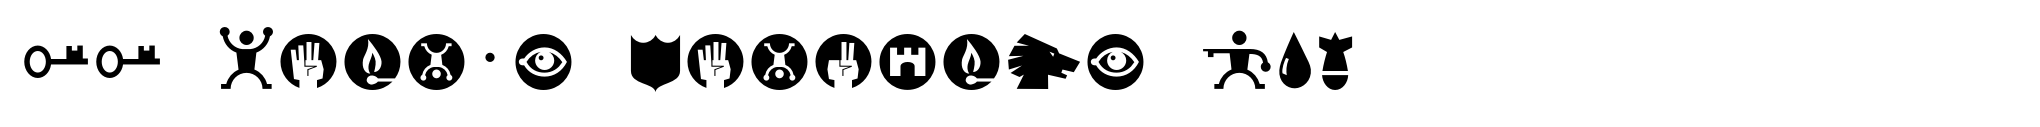 FF Rian's Dingbats Two image